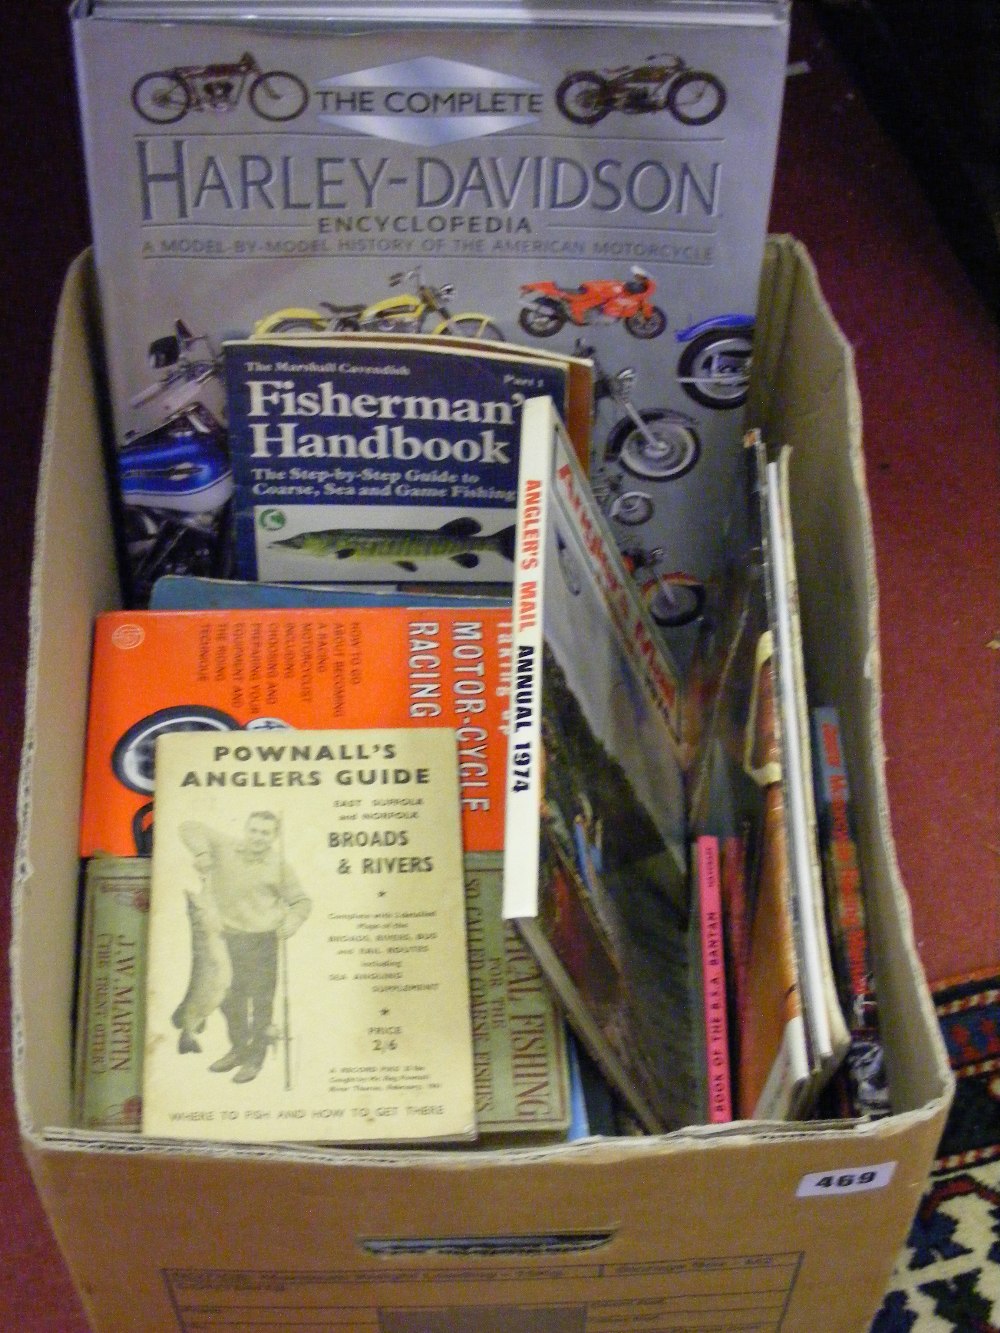 A box of Motorcycle Mechanic vintage magazines, a book of motor cycle interest, plus fishing related